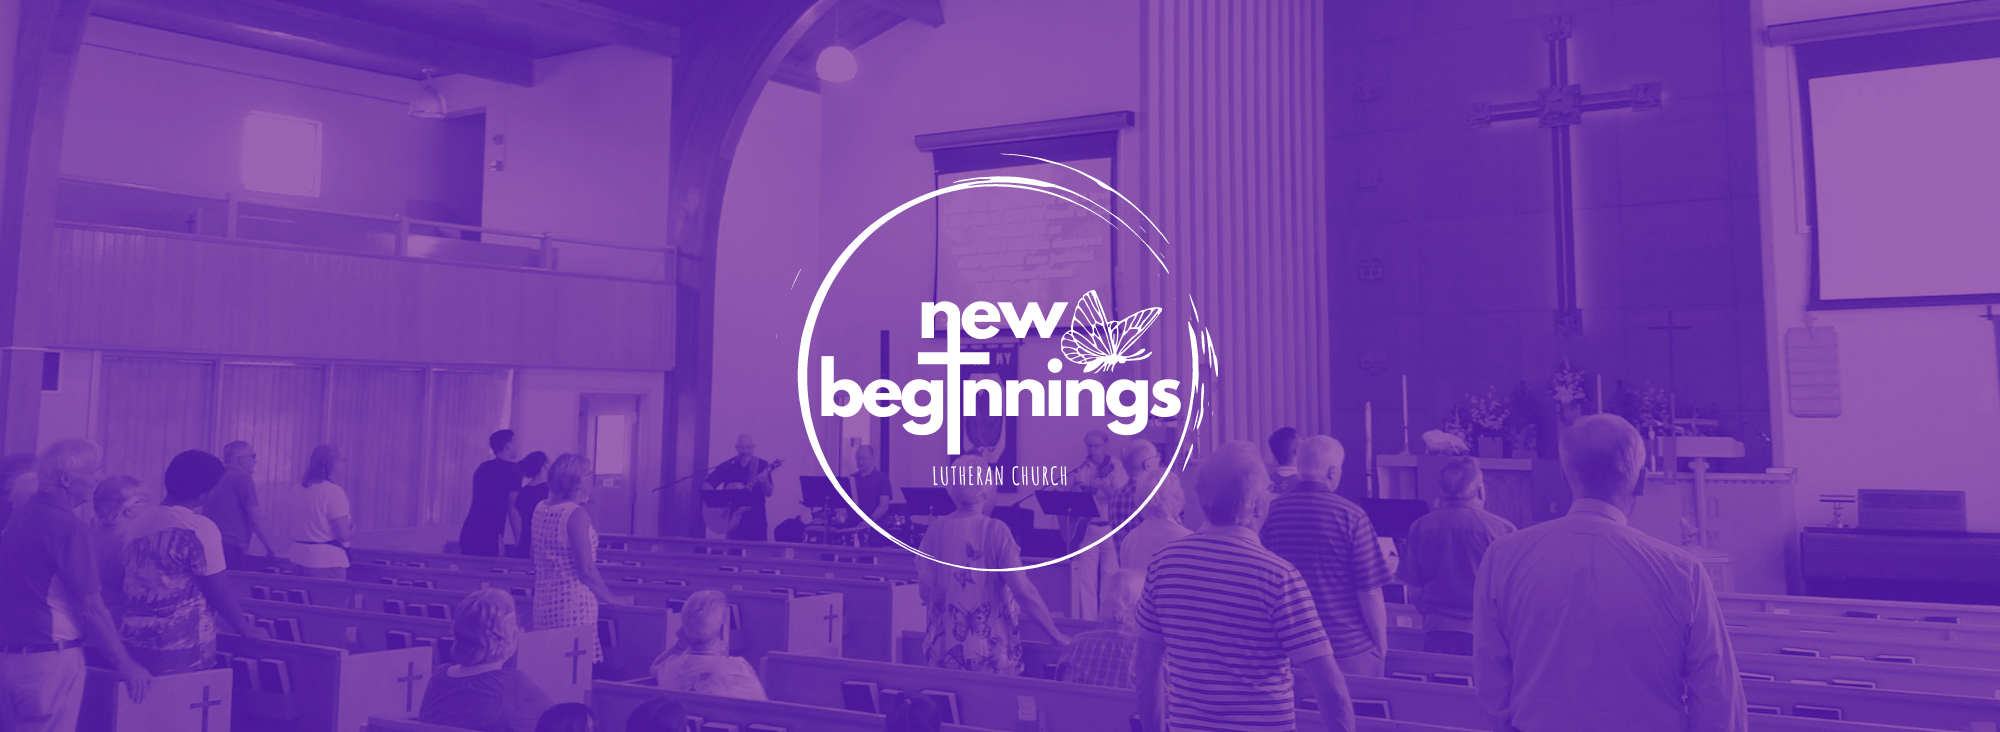 Photo of the congregation singing inside the church building with New Beginnings logo in front